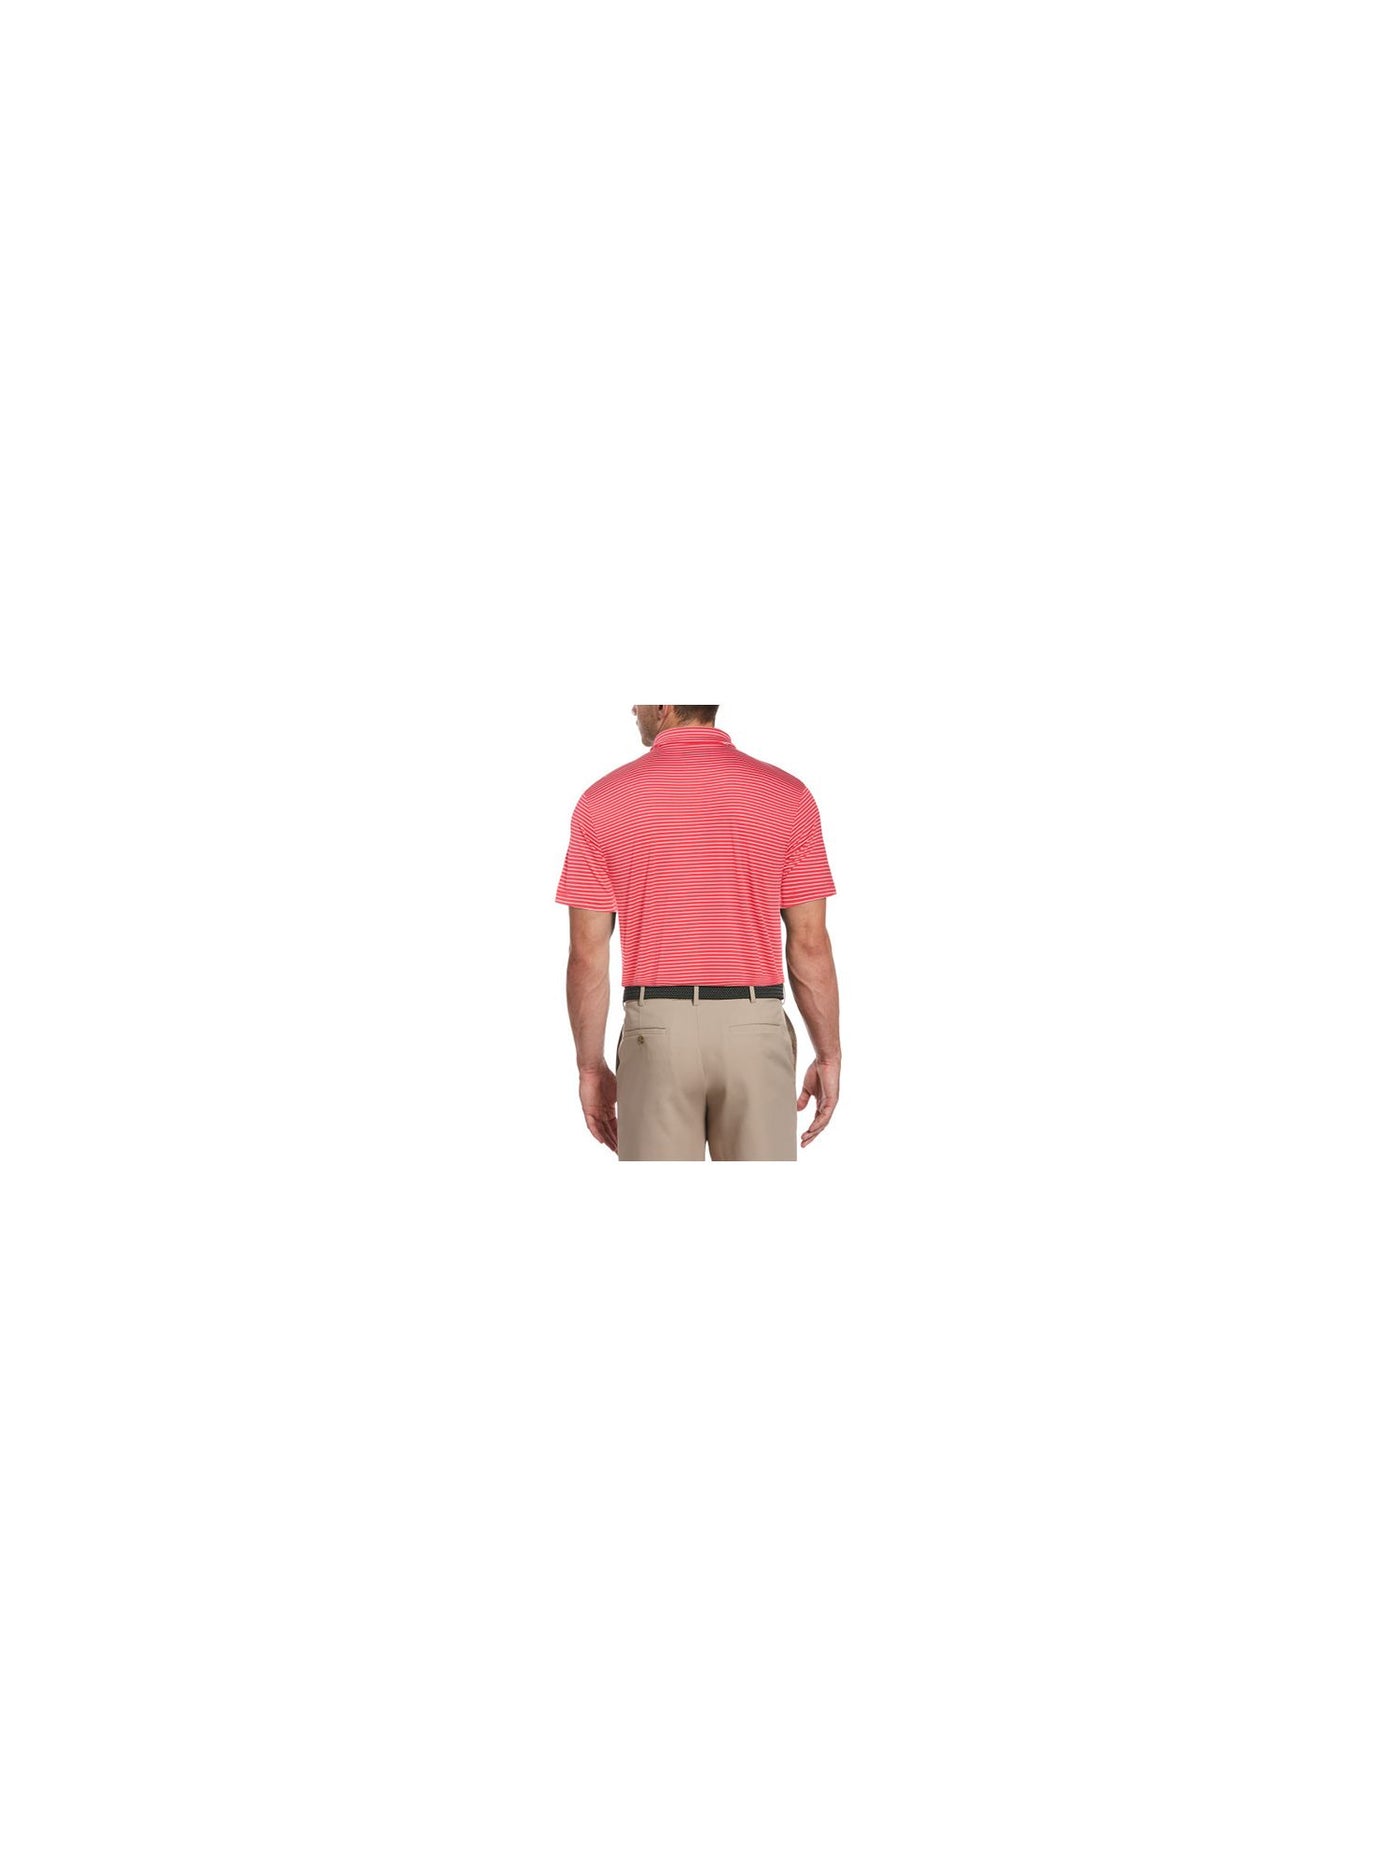 HYBRID APPAREL Mens Red Lightweight, Striped Athletic Fit Moisture Wicking Polo XXL